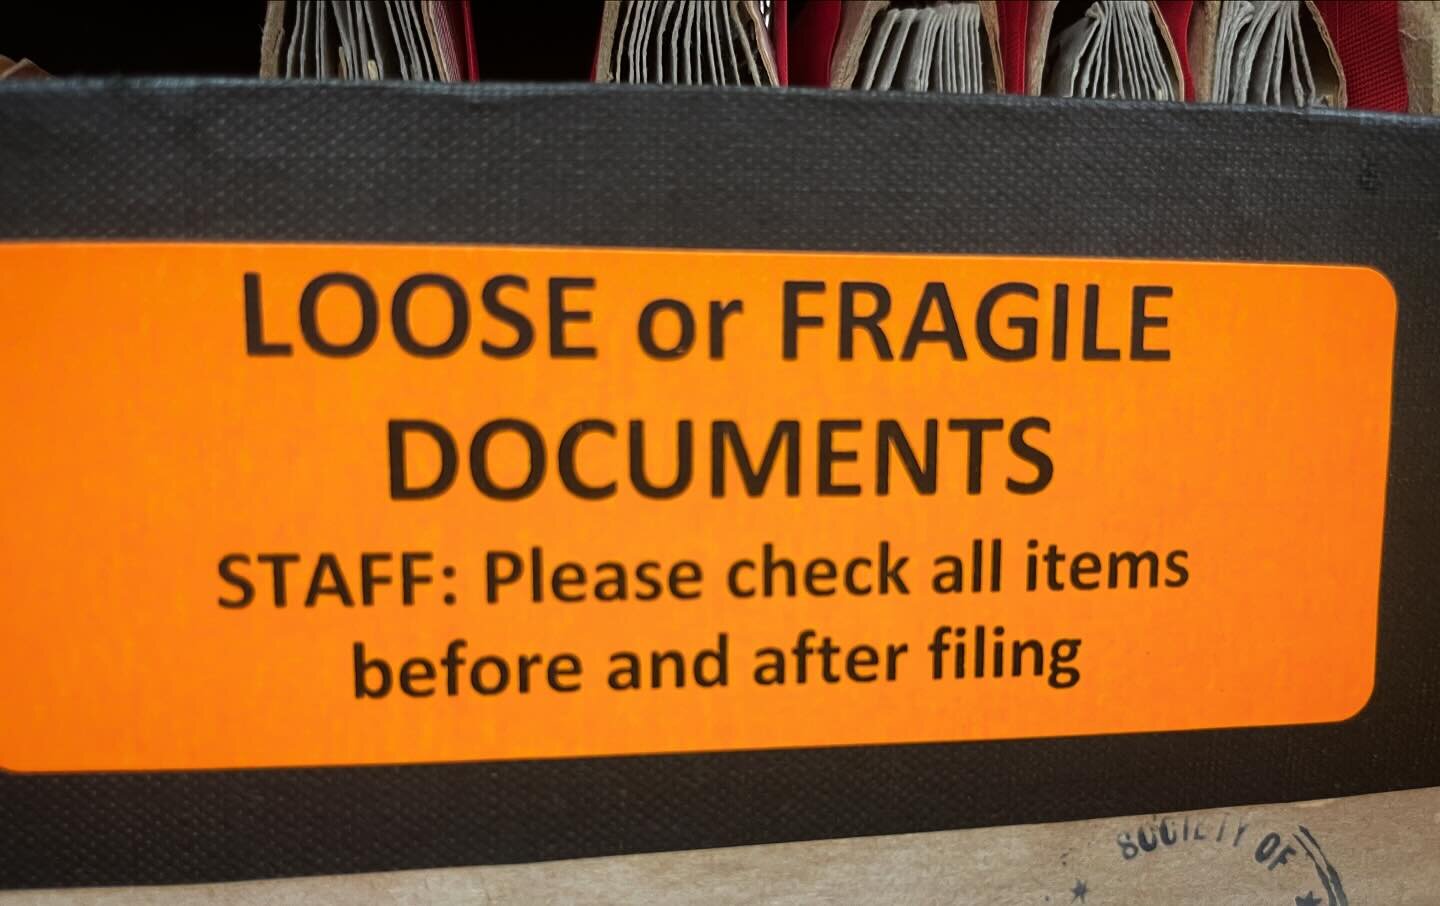 Love a good label in archive storage areas. This one is bright, simple and effective. Handling damage occurs easily to fragile paper based collections. Remember to #handlewithcare #archives #papercollection #handlingdamage #labels #collectioncare